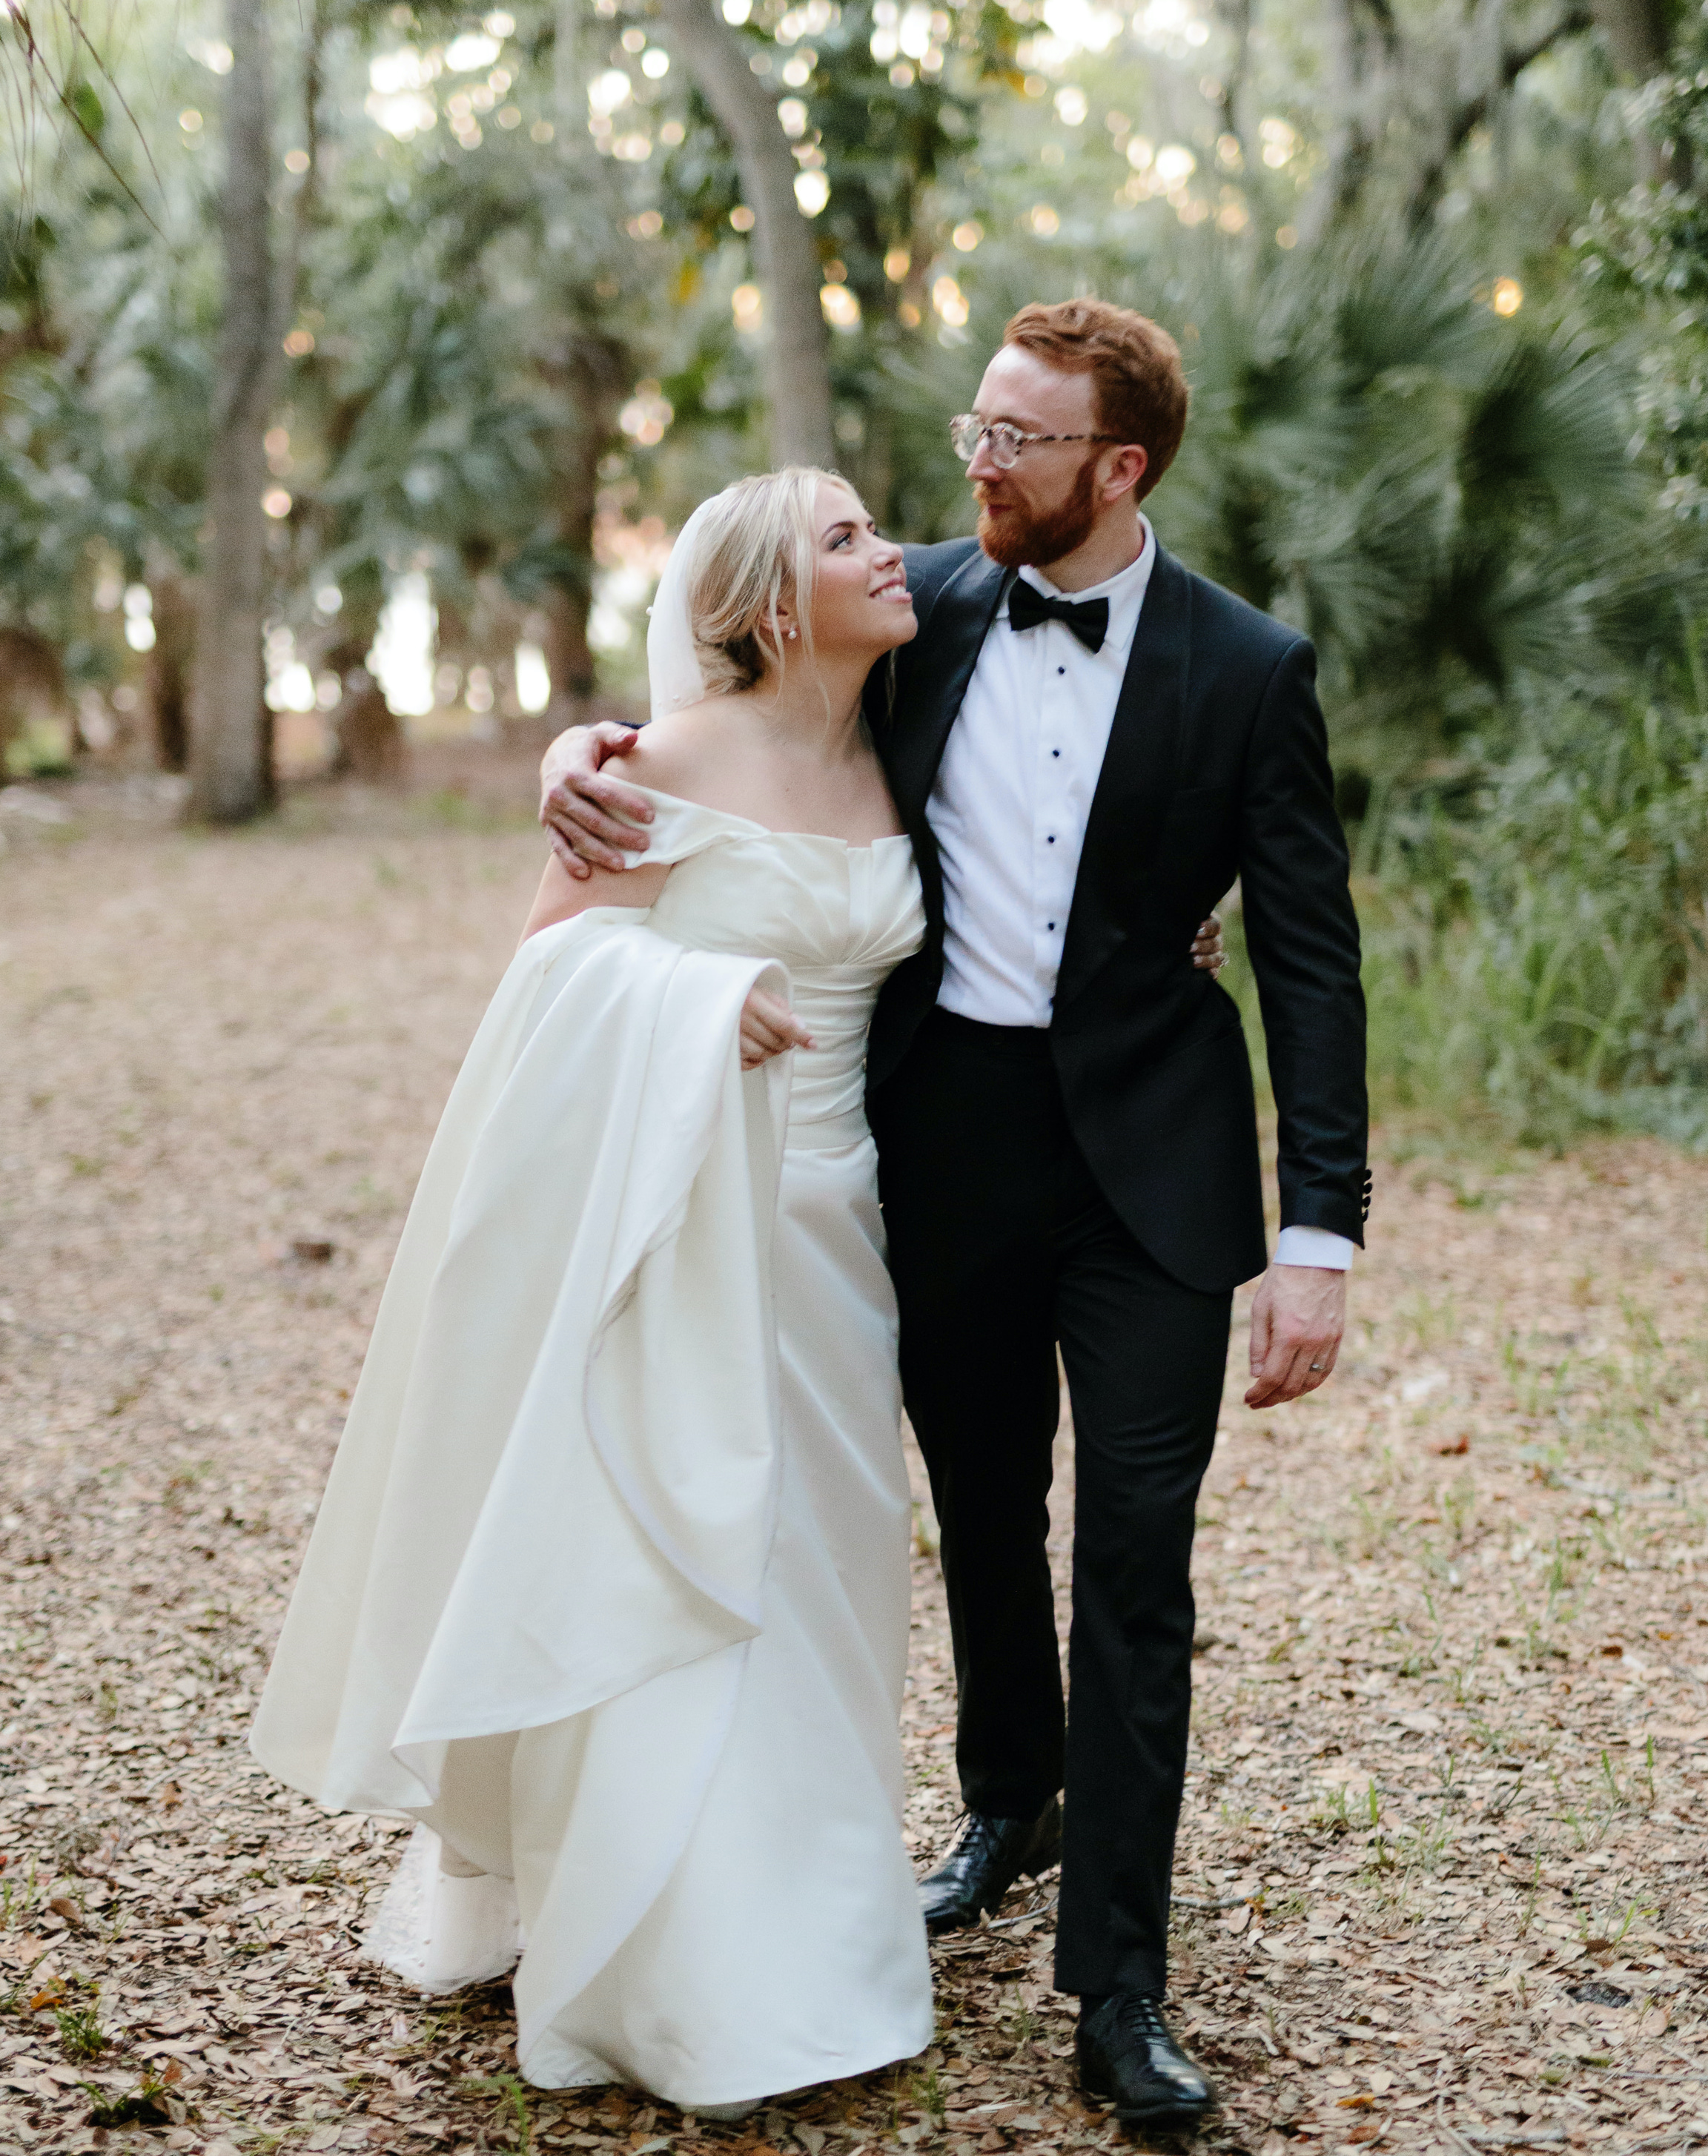 A bride and groom walk together in the woods after their intimate alfresco summer wedding in Sarasota, FL.